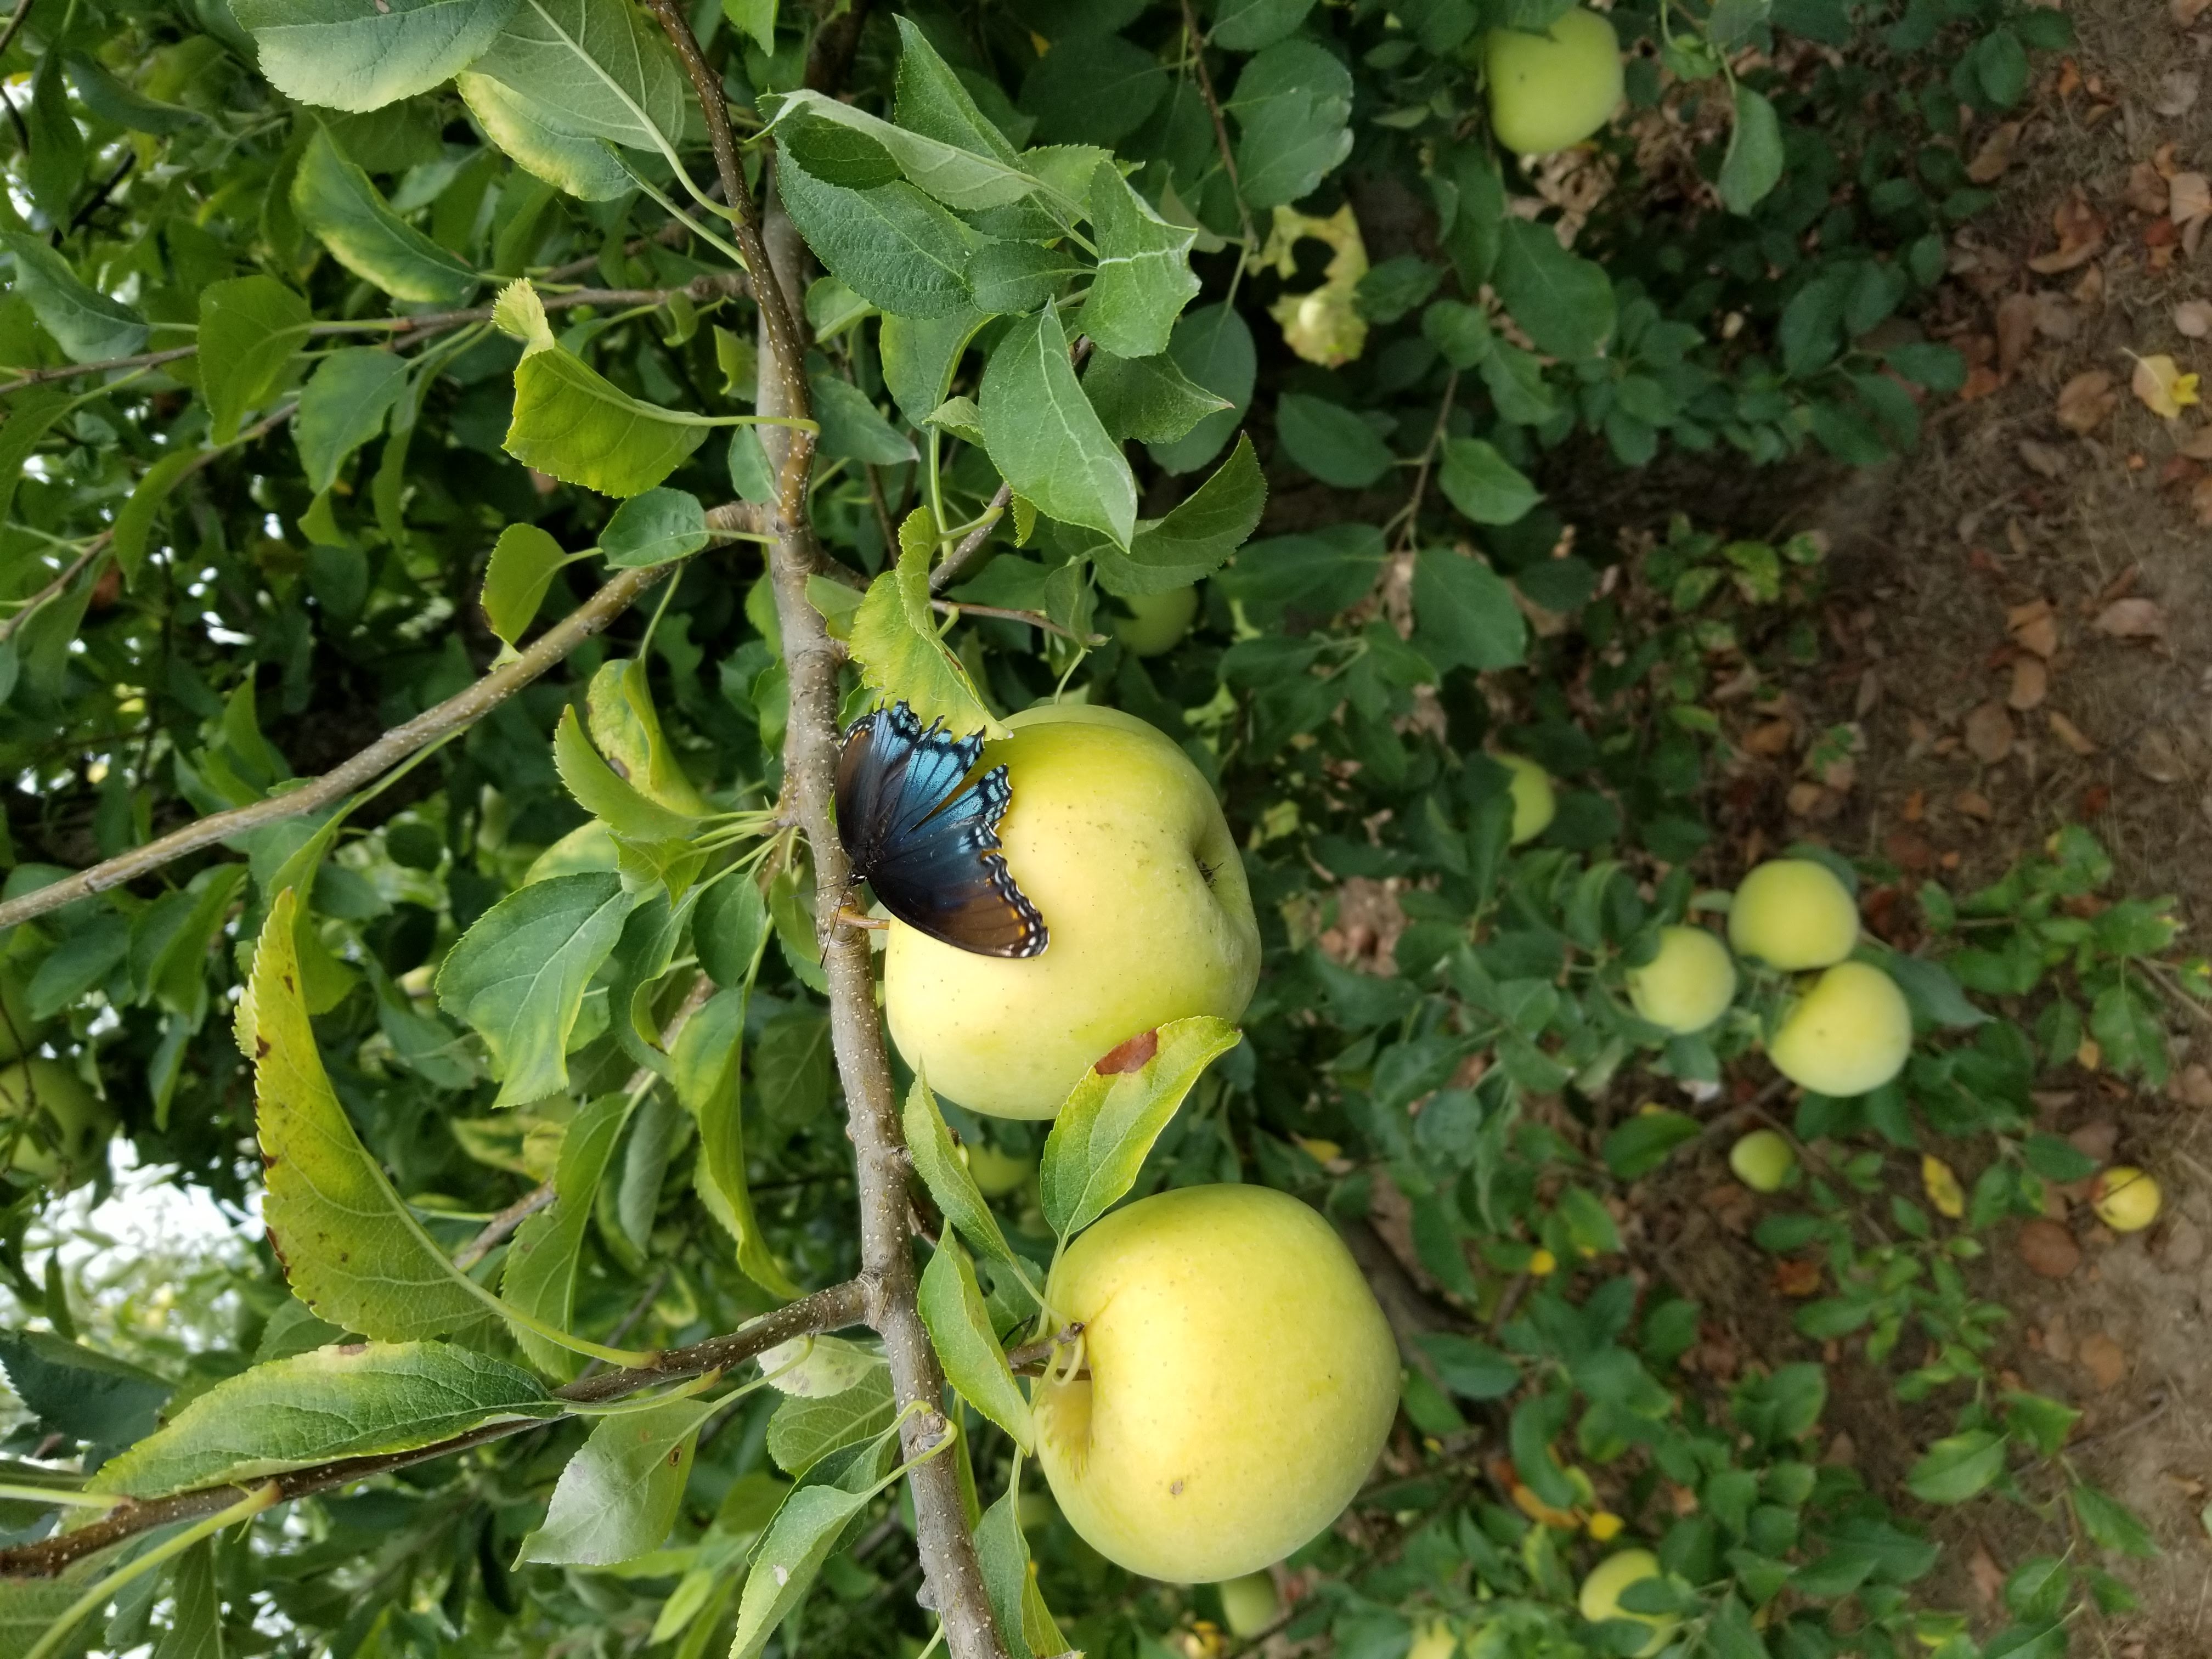 butterfly resting on an apple on a tree